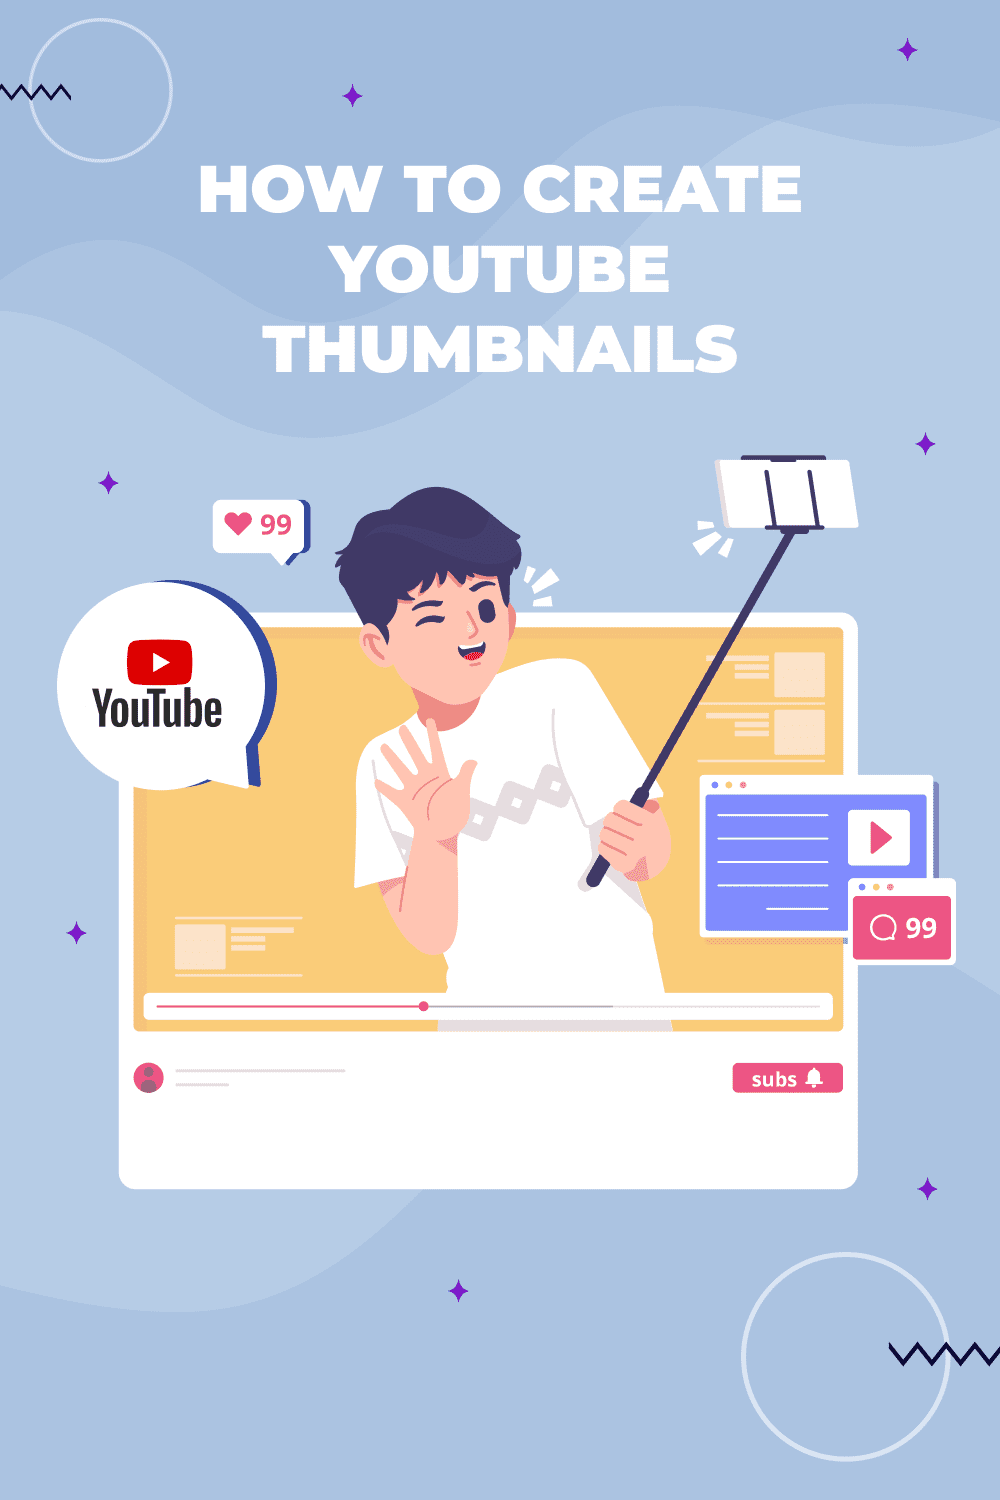 how to create youtube thumbnails pinterest.